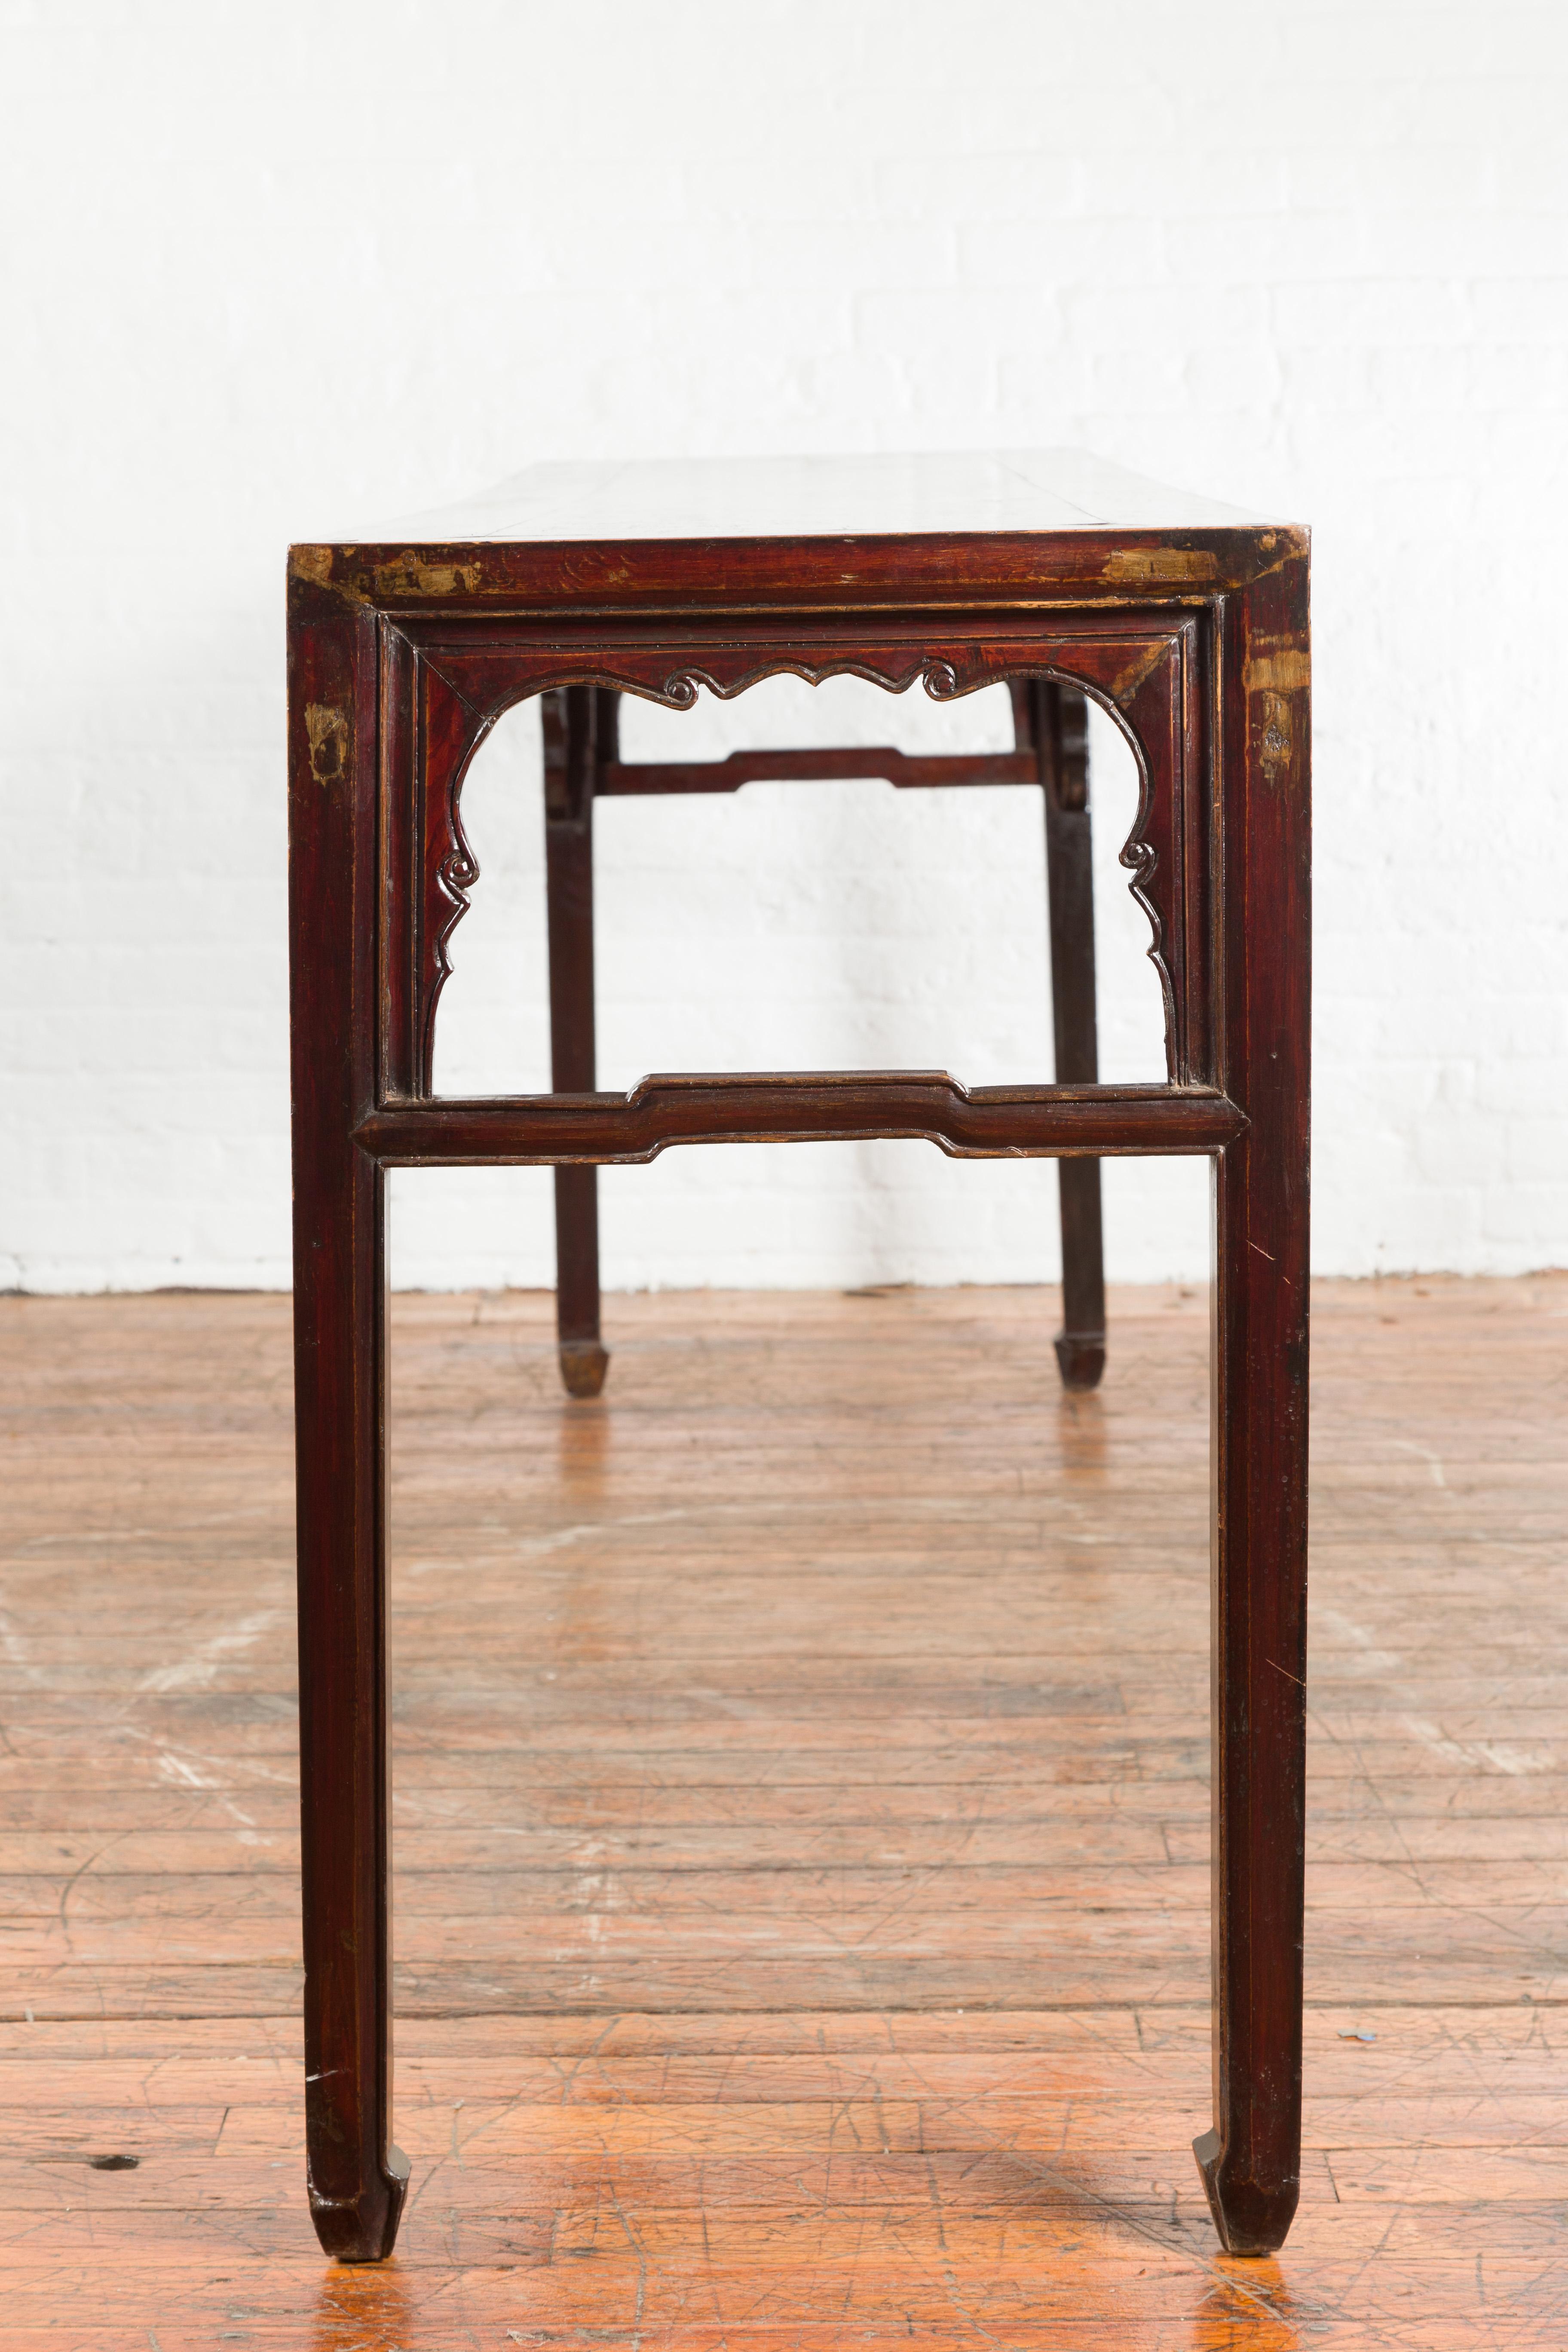 Chinese 19th Century Qing Dynasty Altar Console Table with Reddish Brown Patina 9